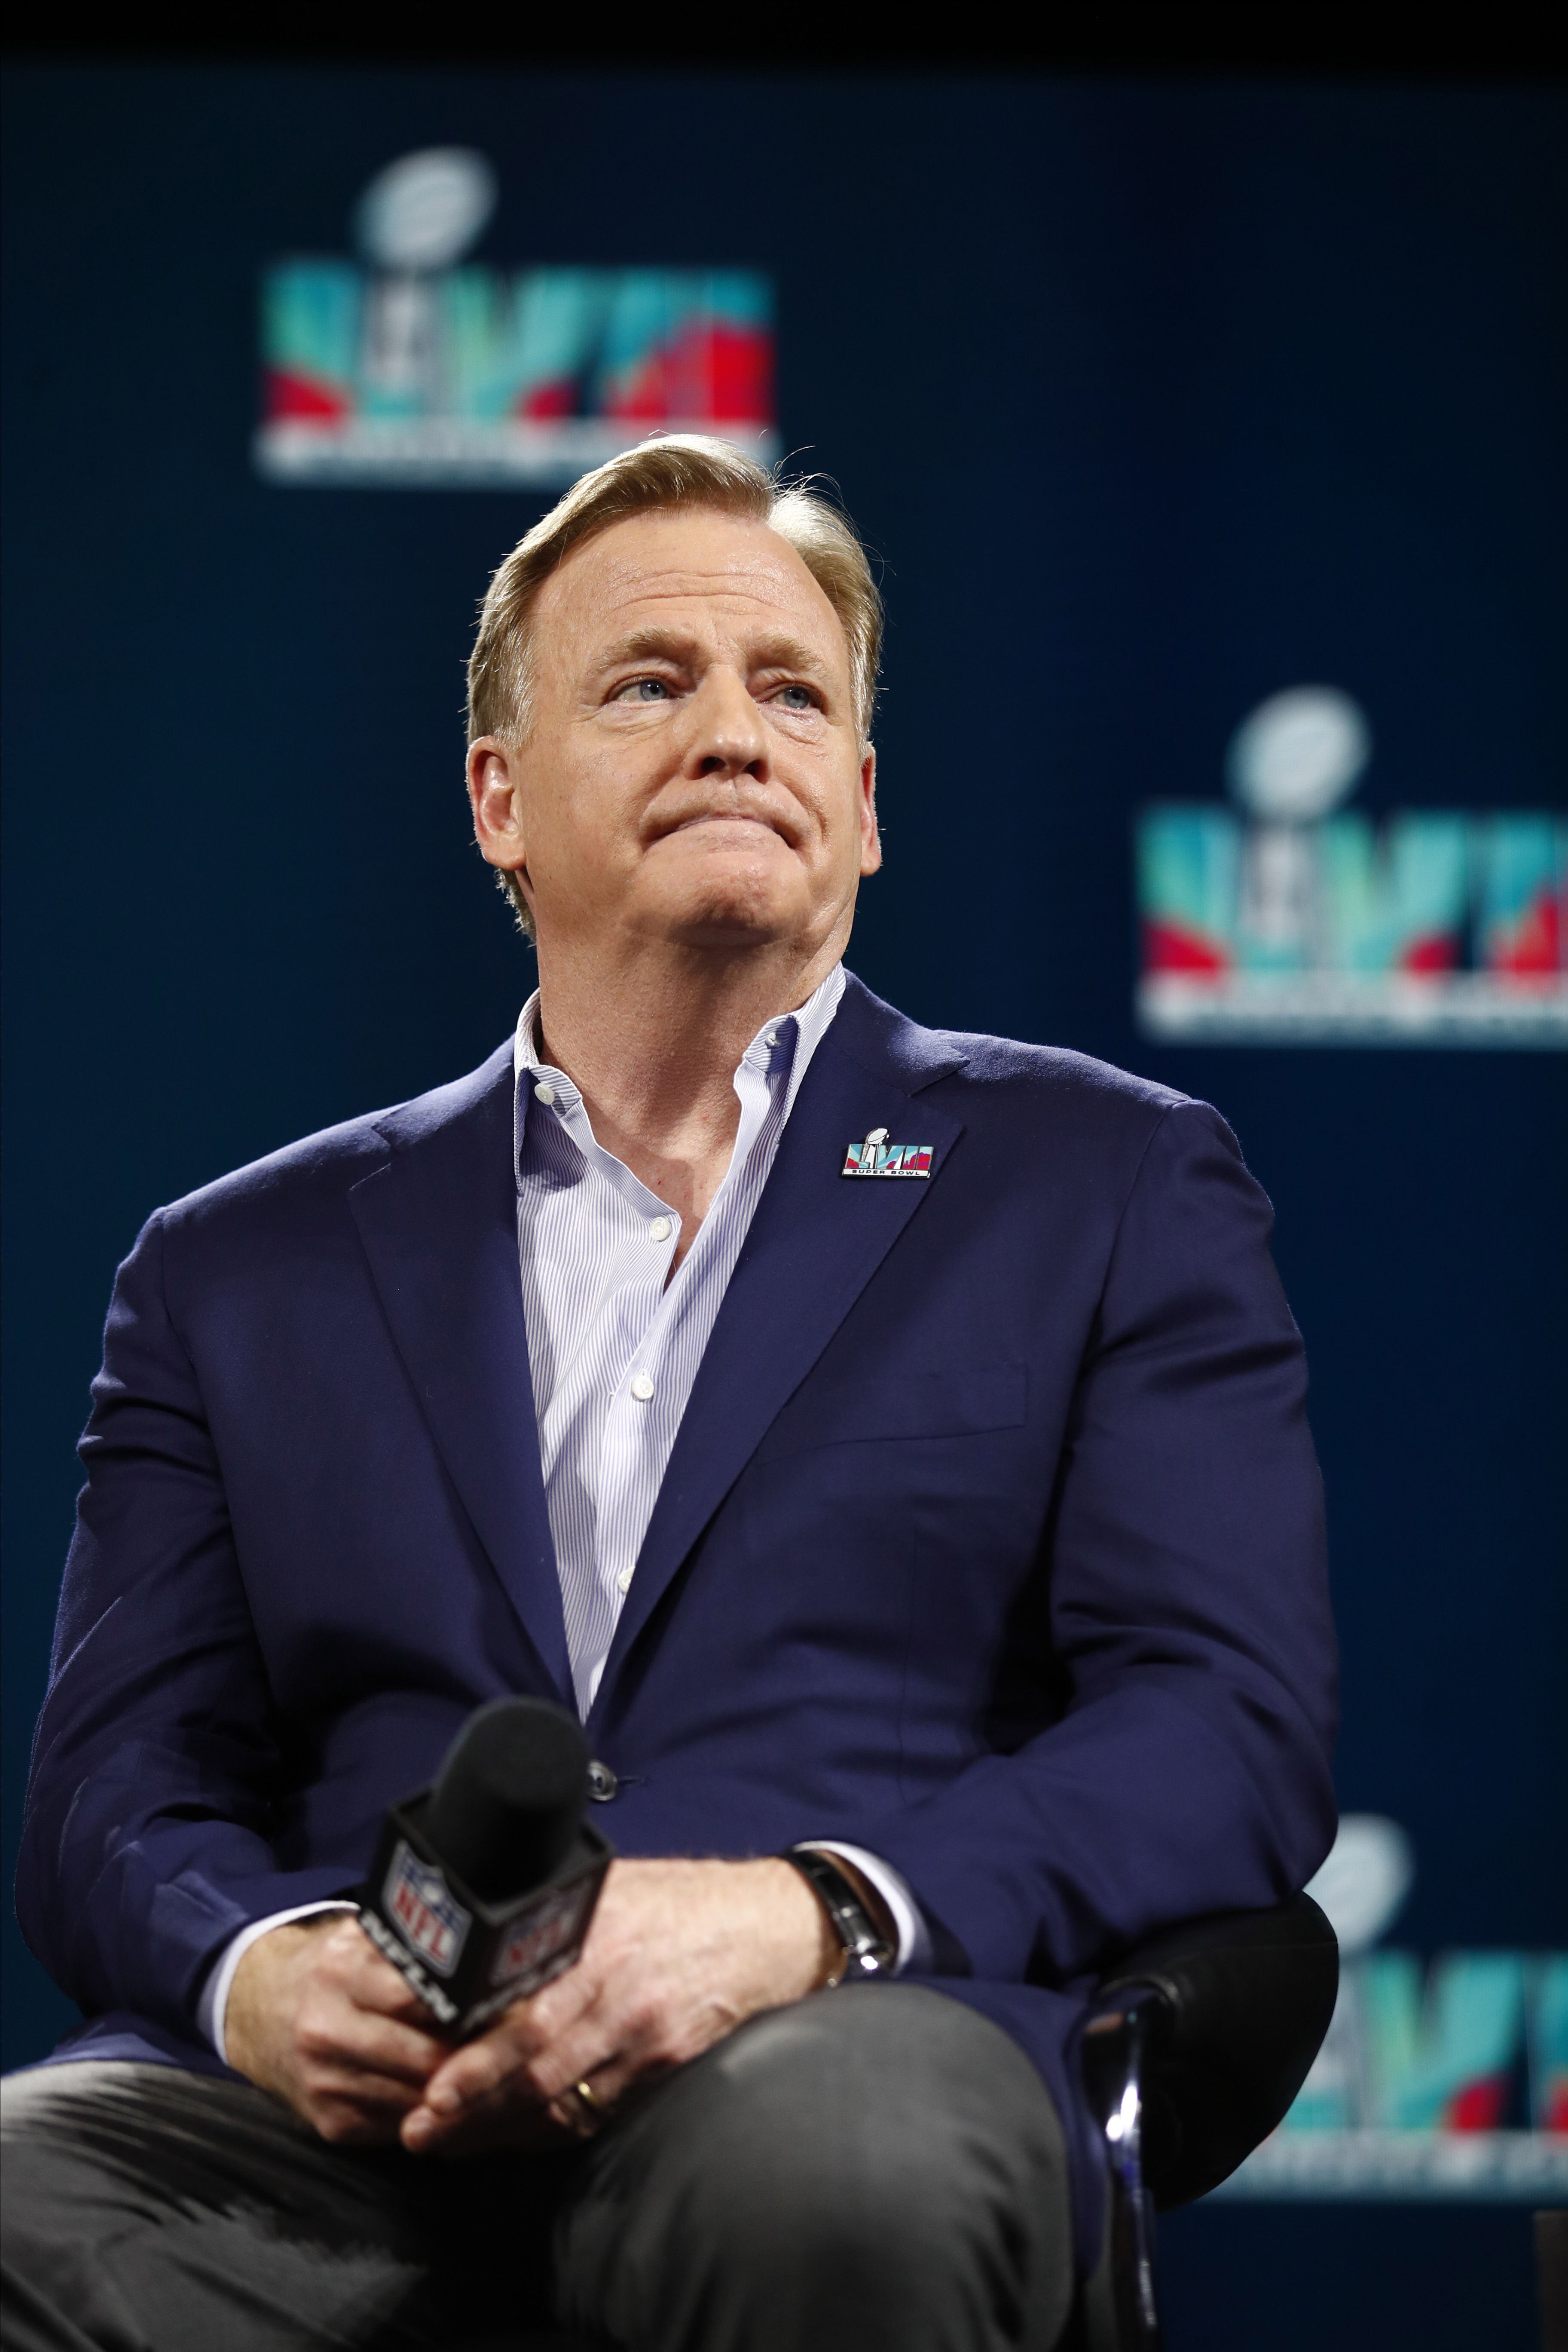 The NFL commissioner says that it is projected to have up to 16 games outside the United States.